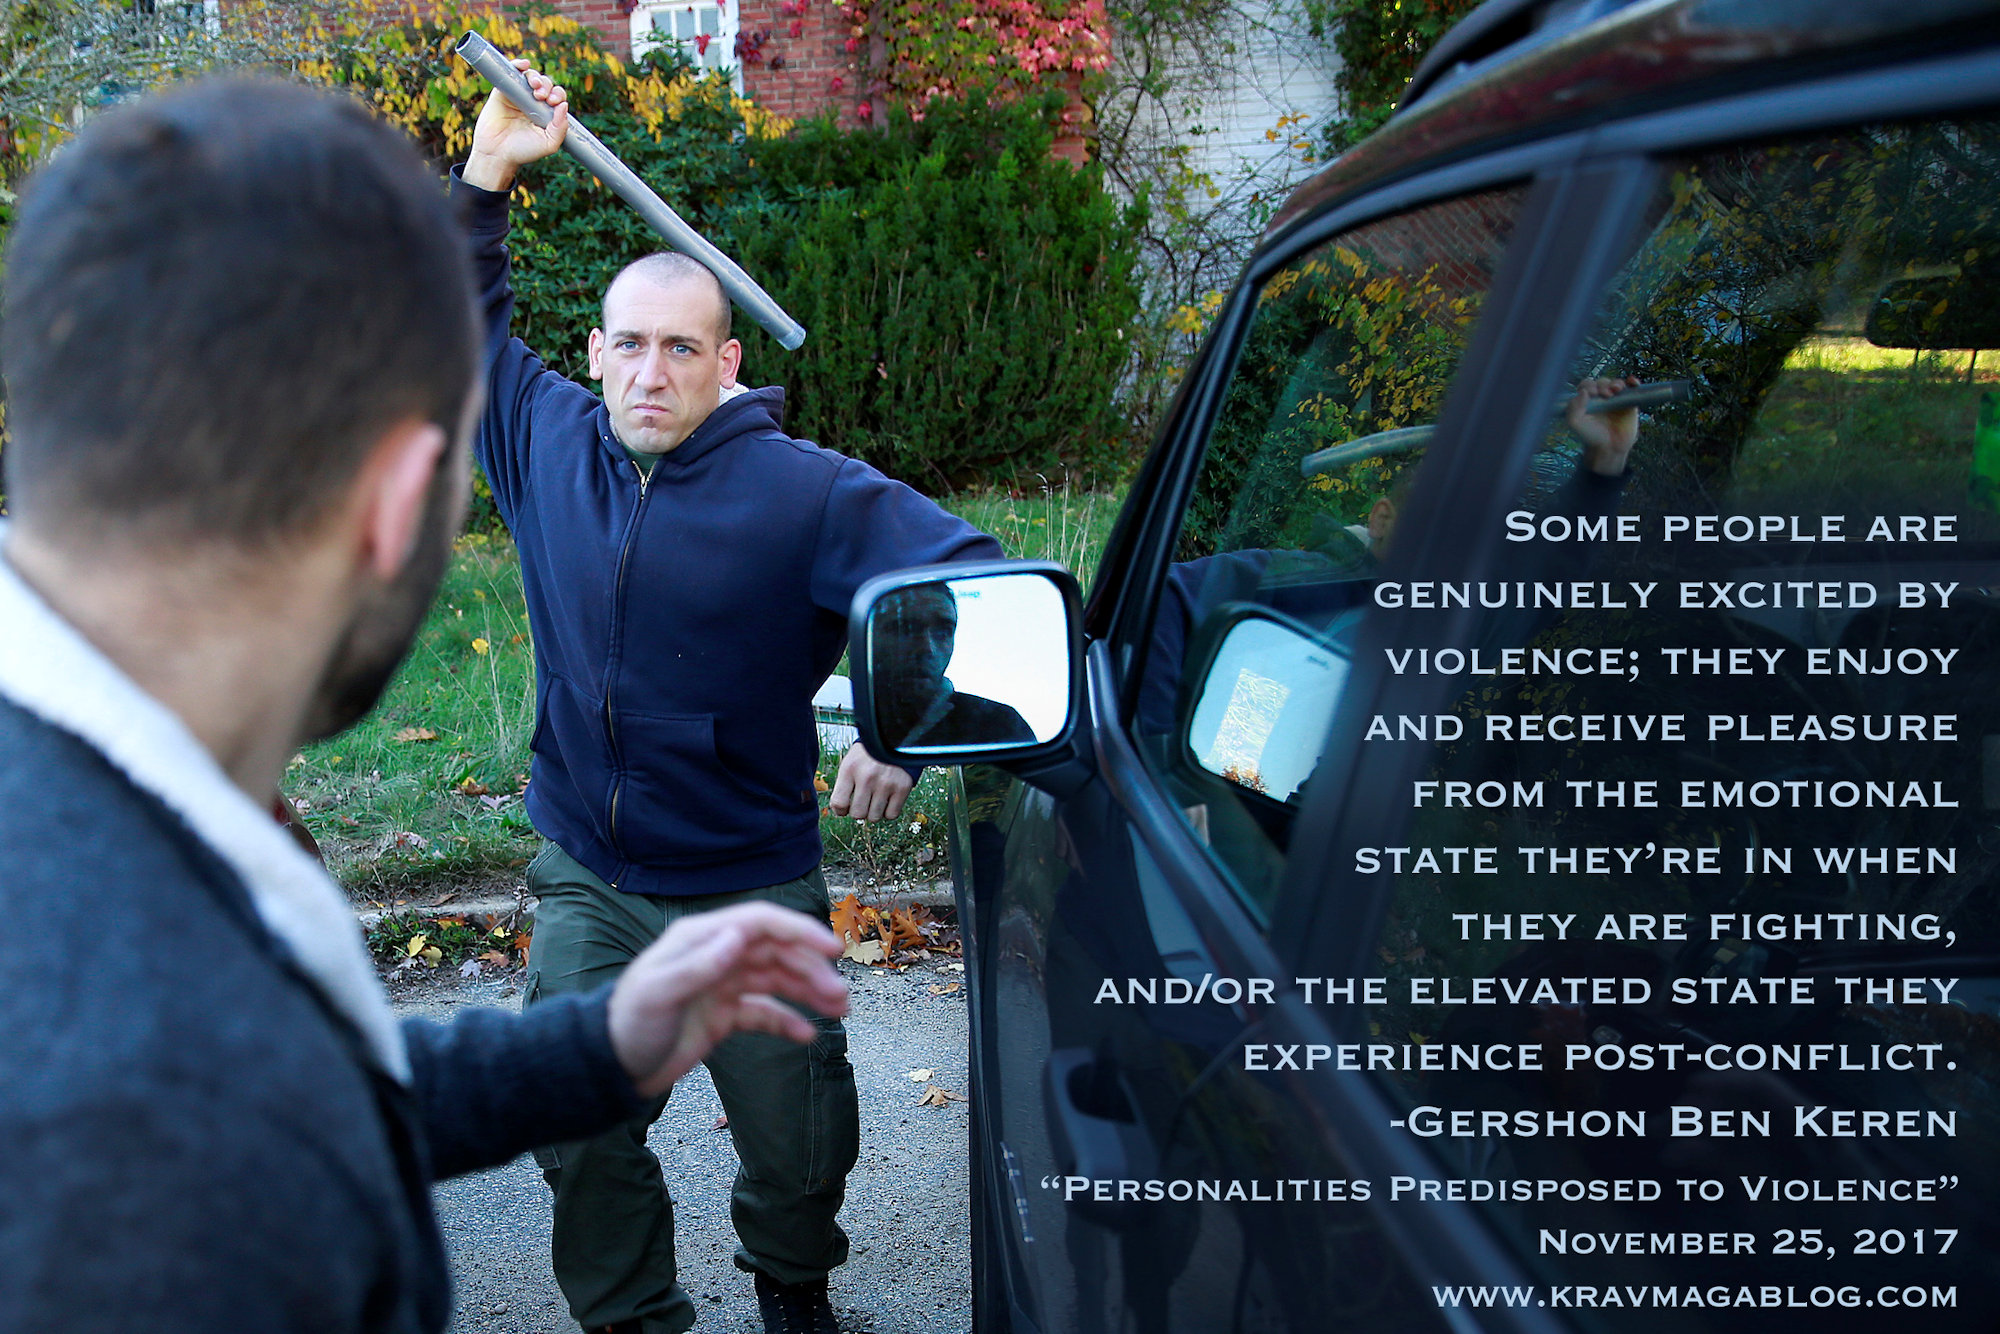 Personalities Predisposed to Violence